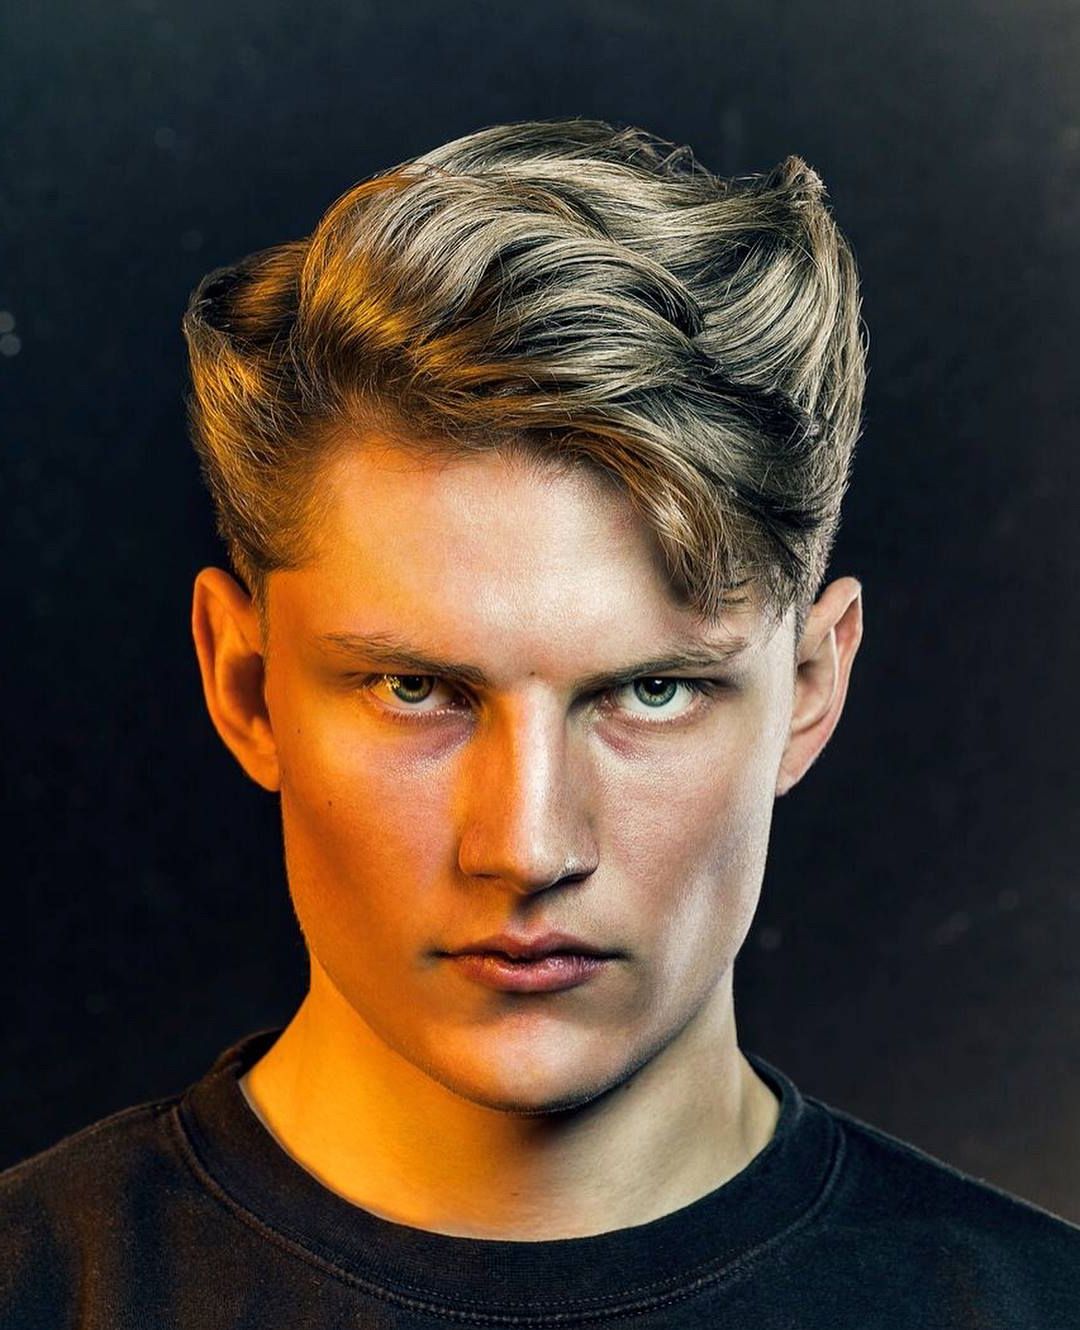 25 Latest Side Part Haircuts 2019 – Men's Hairstyle Swag Intended For Most Popular Wavy Side Part Hairstyles (View 16 of 20)